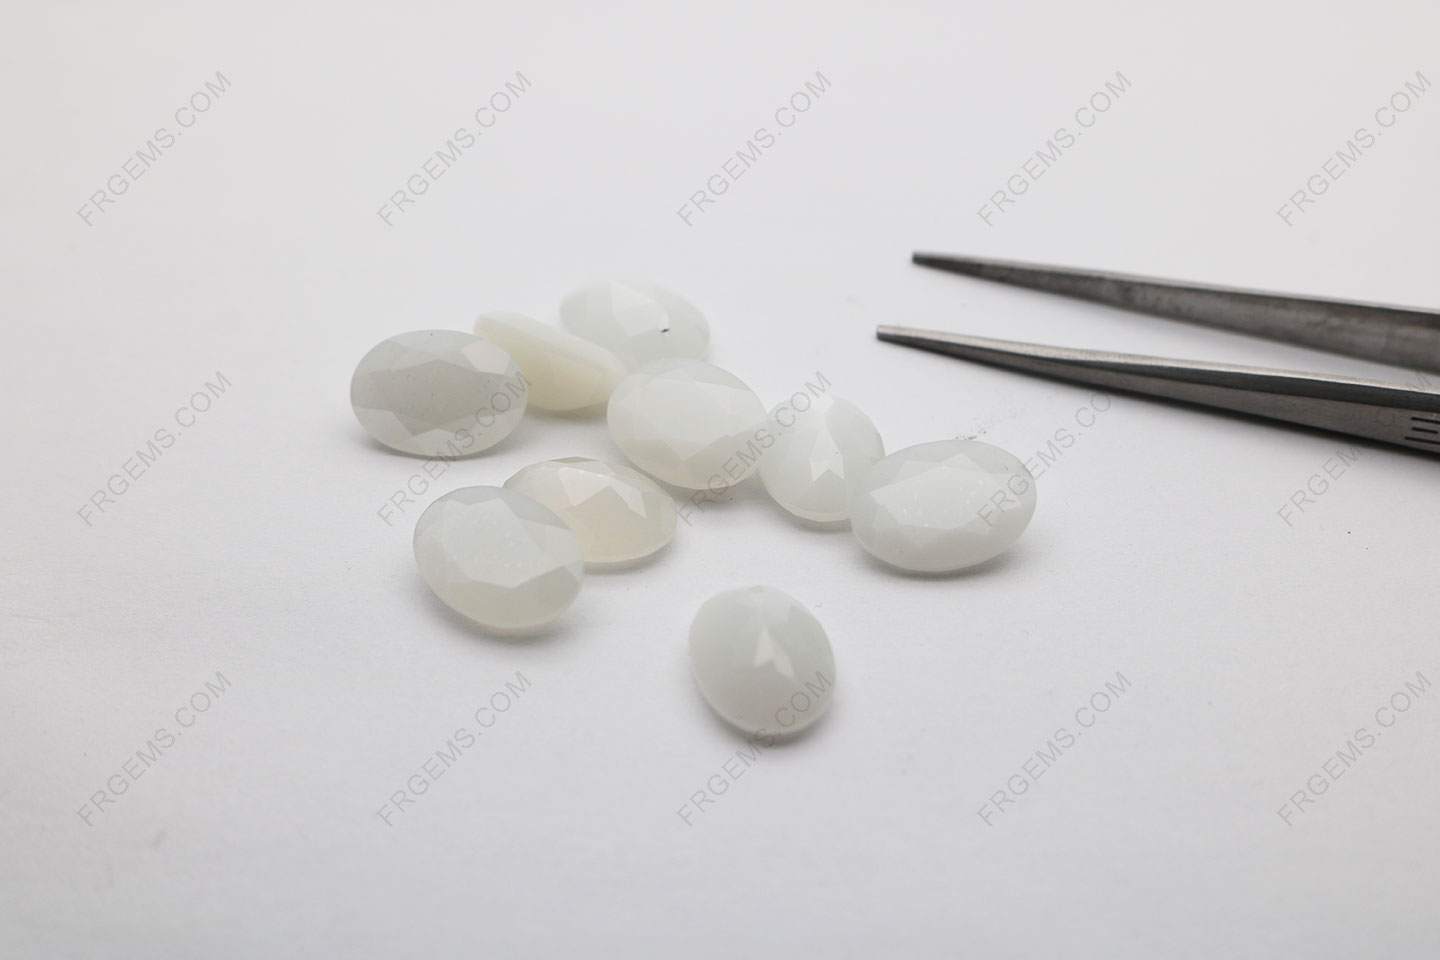 Loose Natural Moonstone Oval shape faceted cut 14x10mm gemstones wholesale from China